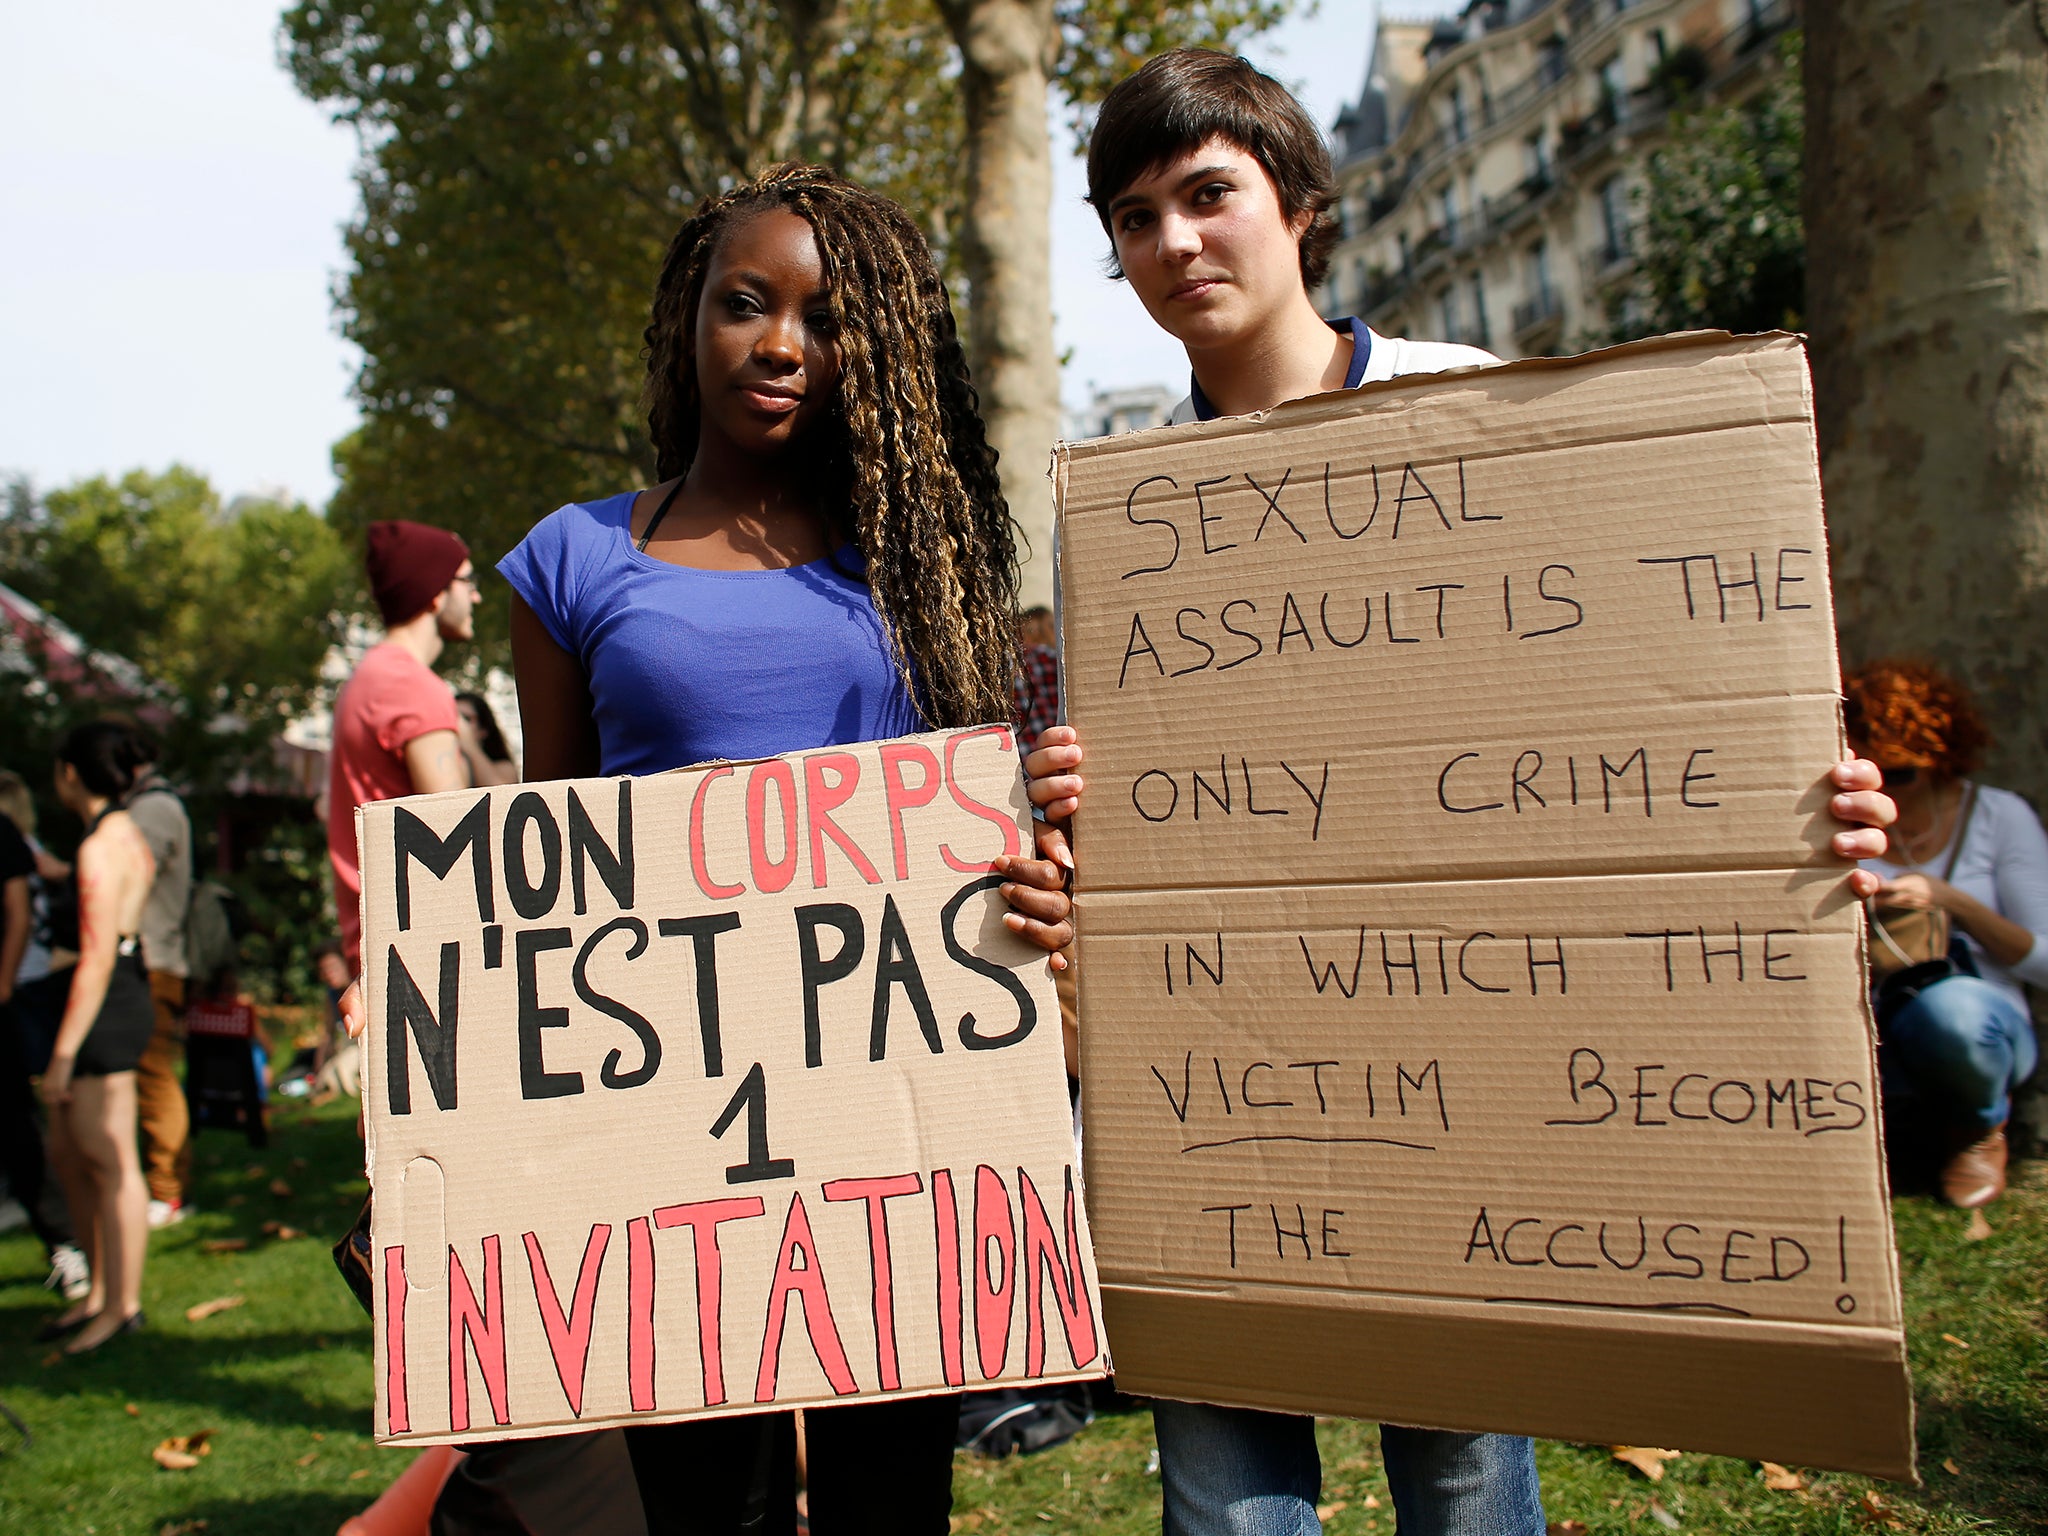 Two women attend a Paris protest against blaming victims of sexual violence. The sign on the left reads 'My body is not an invitation'